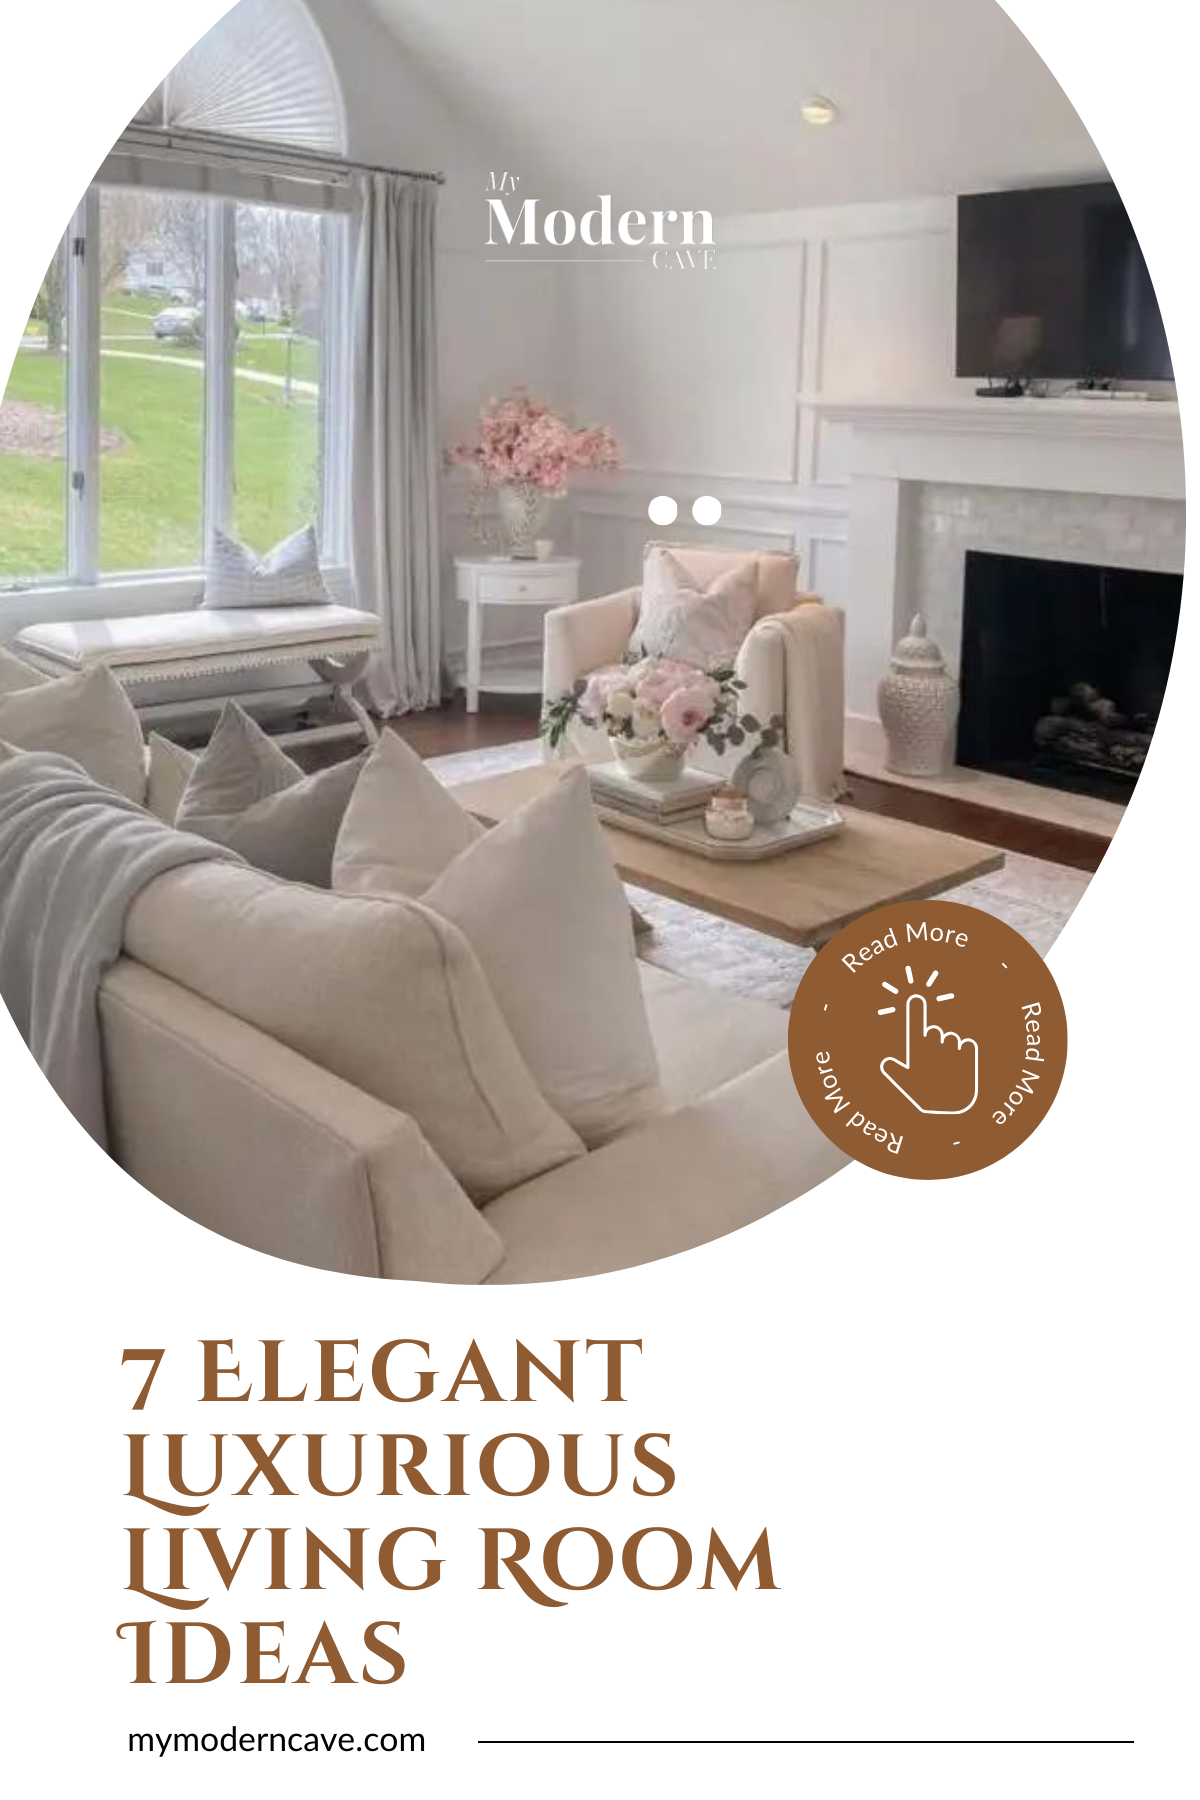 Luxurious Living Room Ideas Infographic